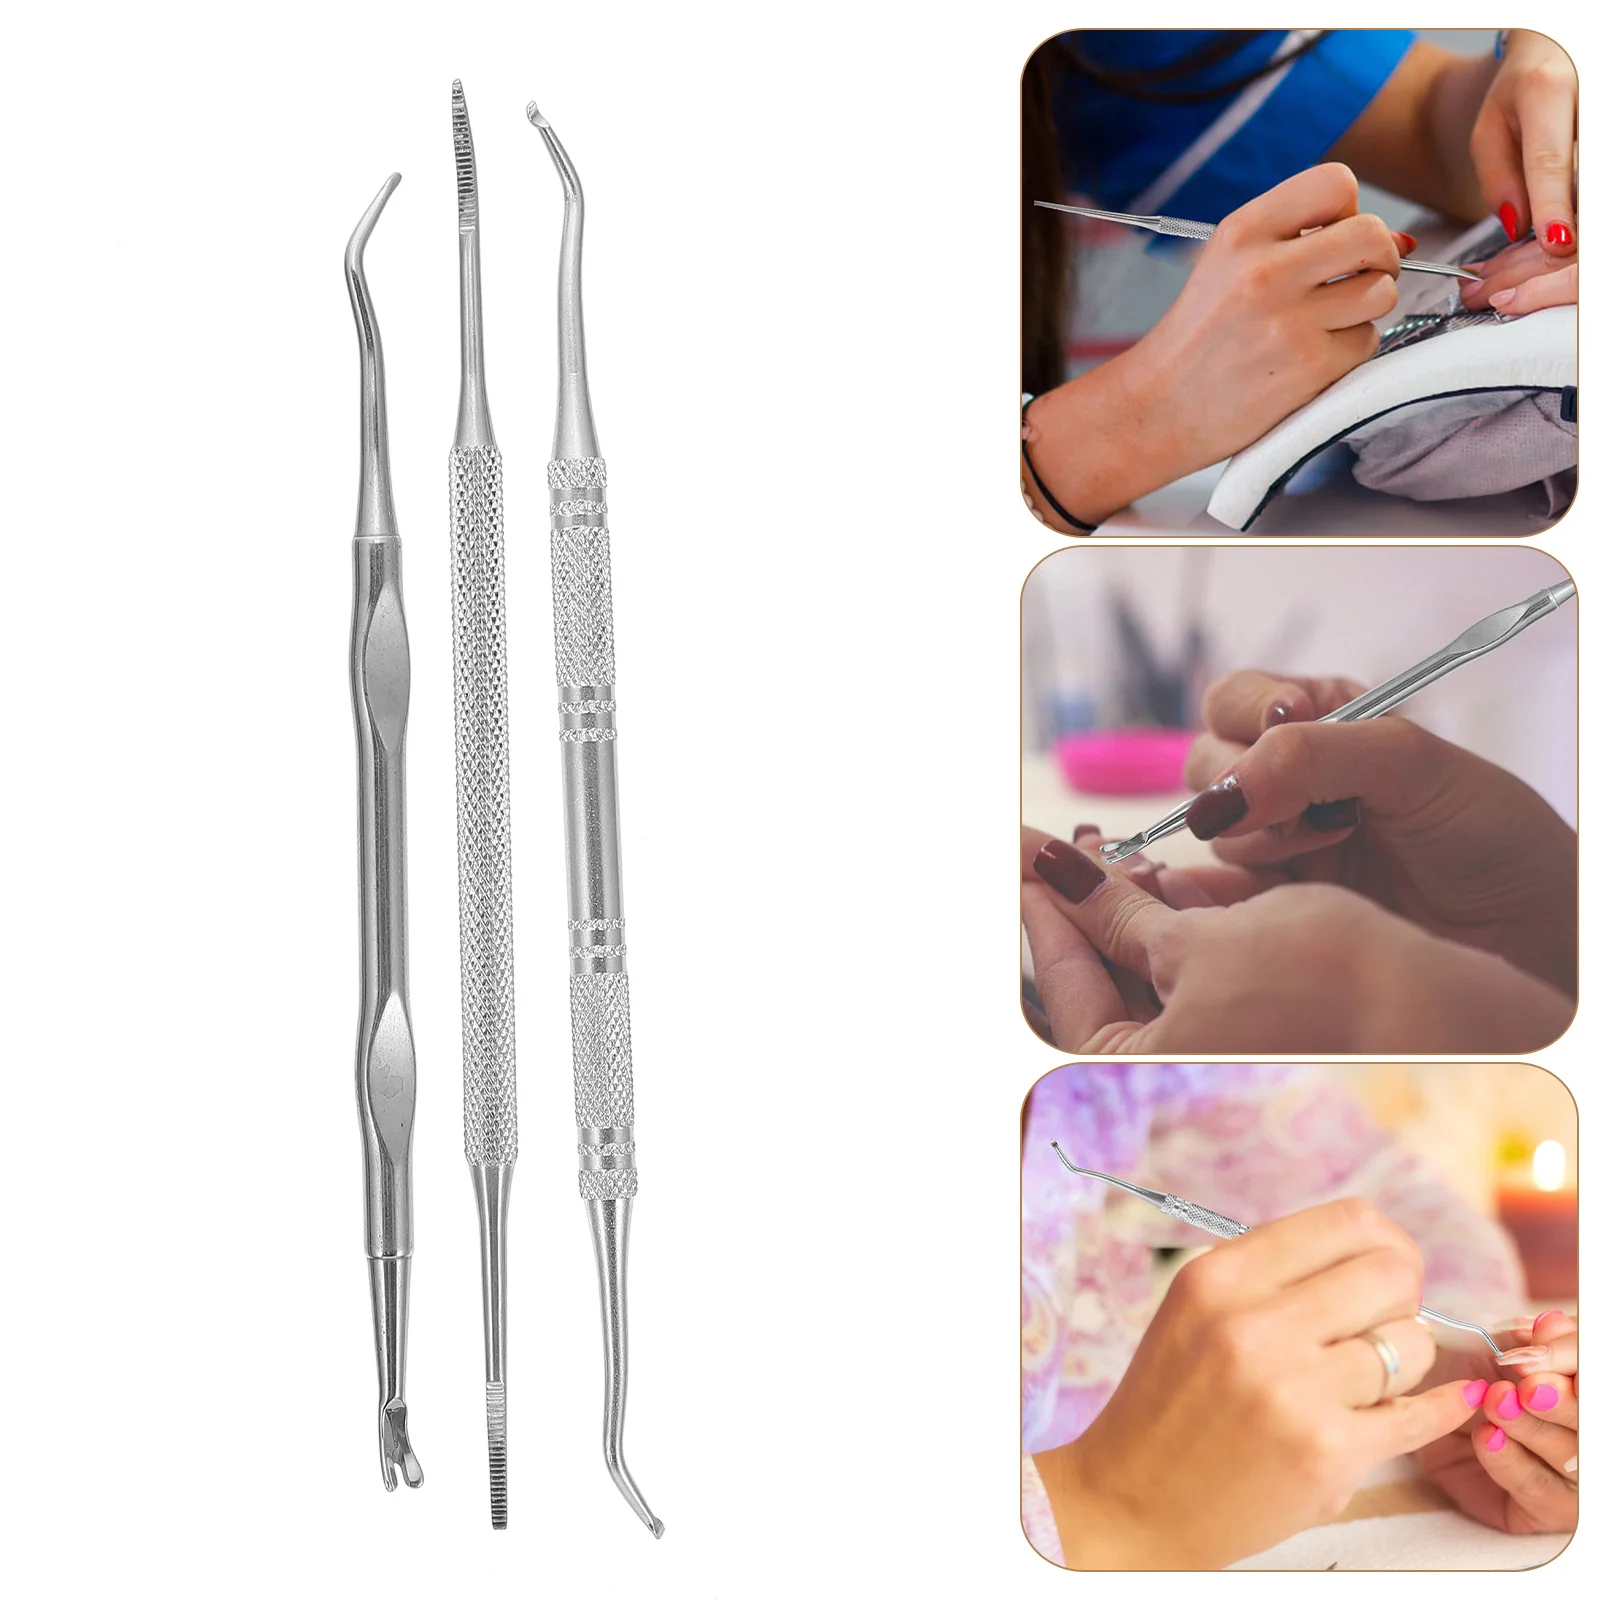 3 Pcs Nail Remover Practical Toenail File Kit Pedicure Tool Ingrown Double-end Cleaner Professional Lifter Dedicated Cleaning 5pcs lot miniature drill bit 0 2 0 25 0 3 0 35 0 4mm nozzle cleaner dedicated to clean 3d printer head nozzle free shipping